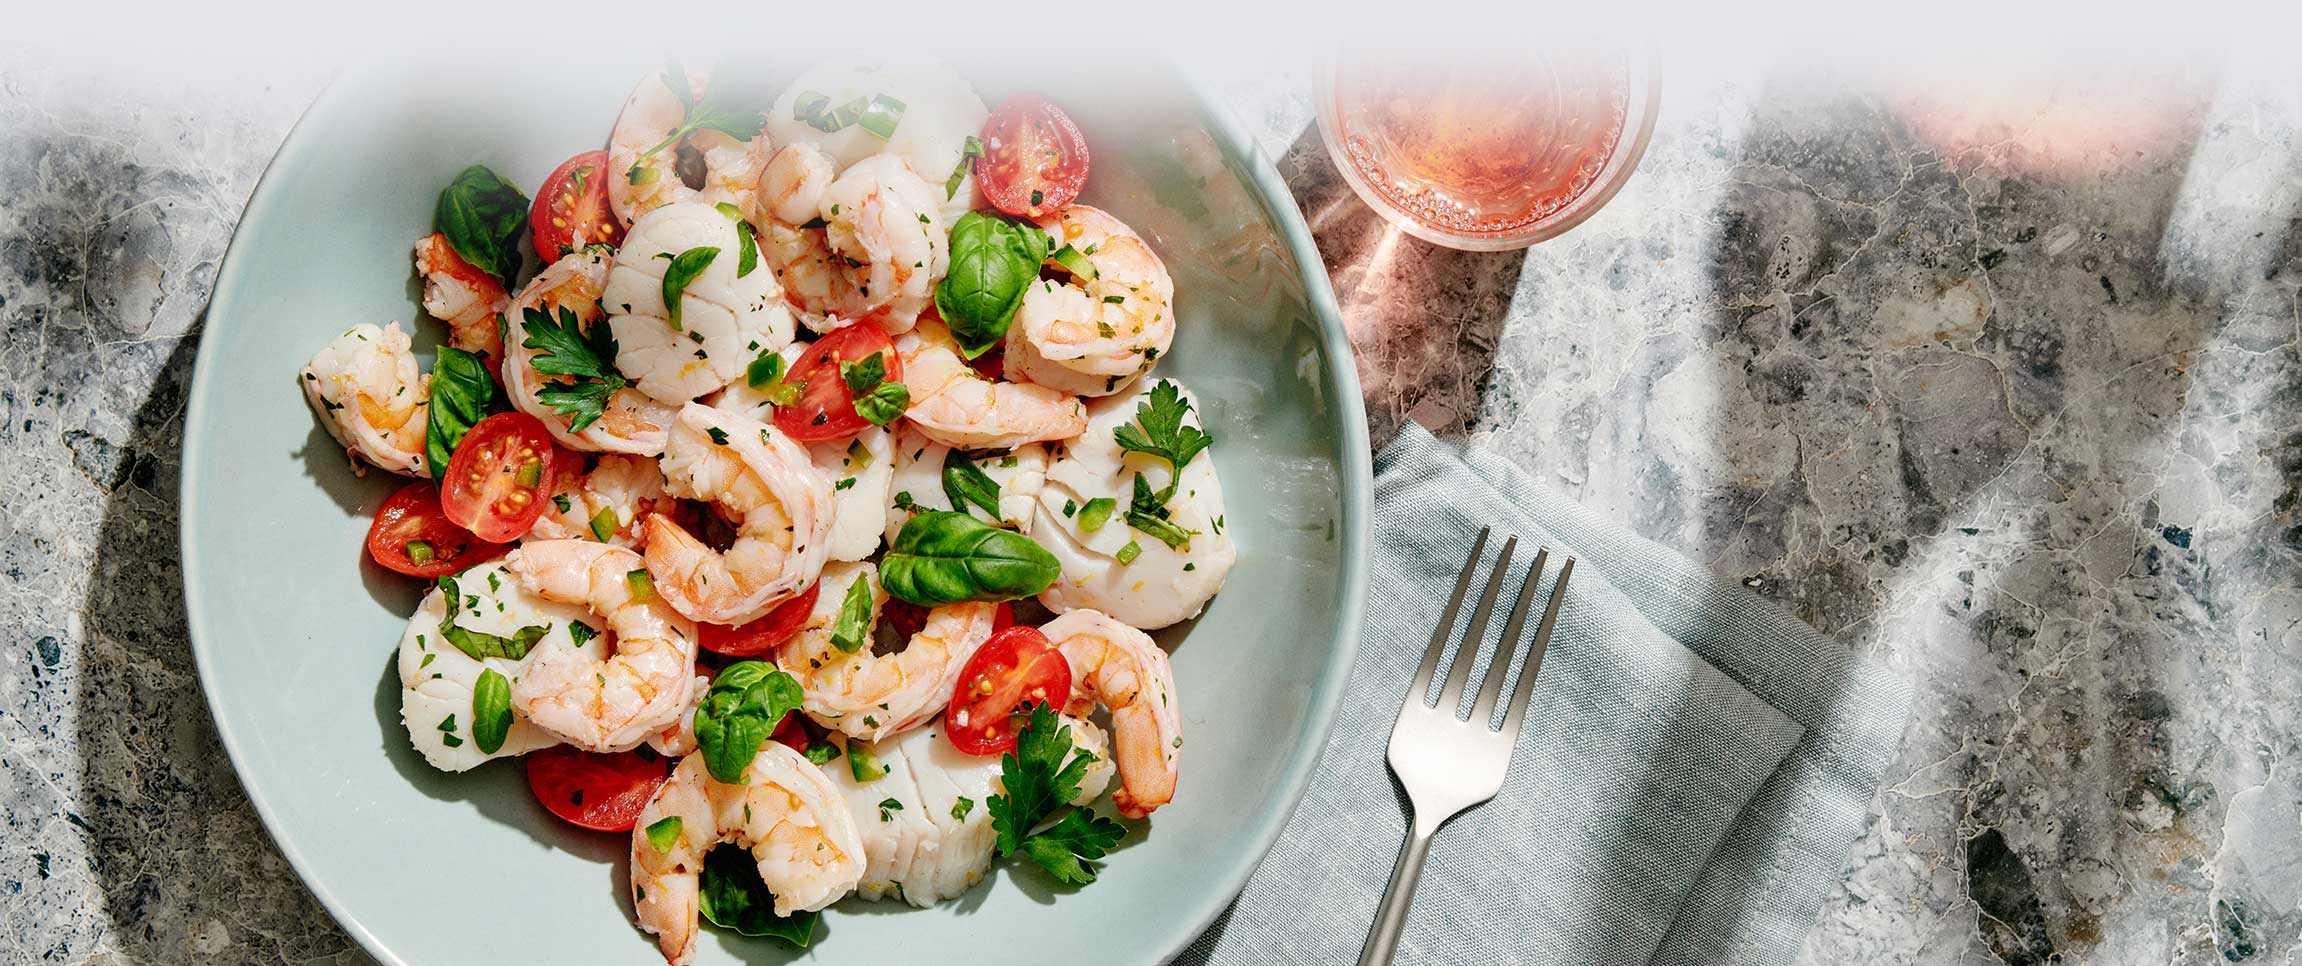 Chilled Shrimp and Scallop Salad